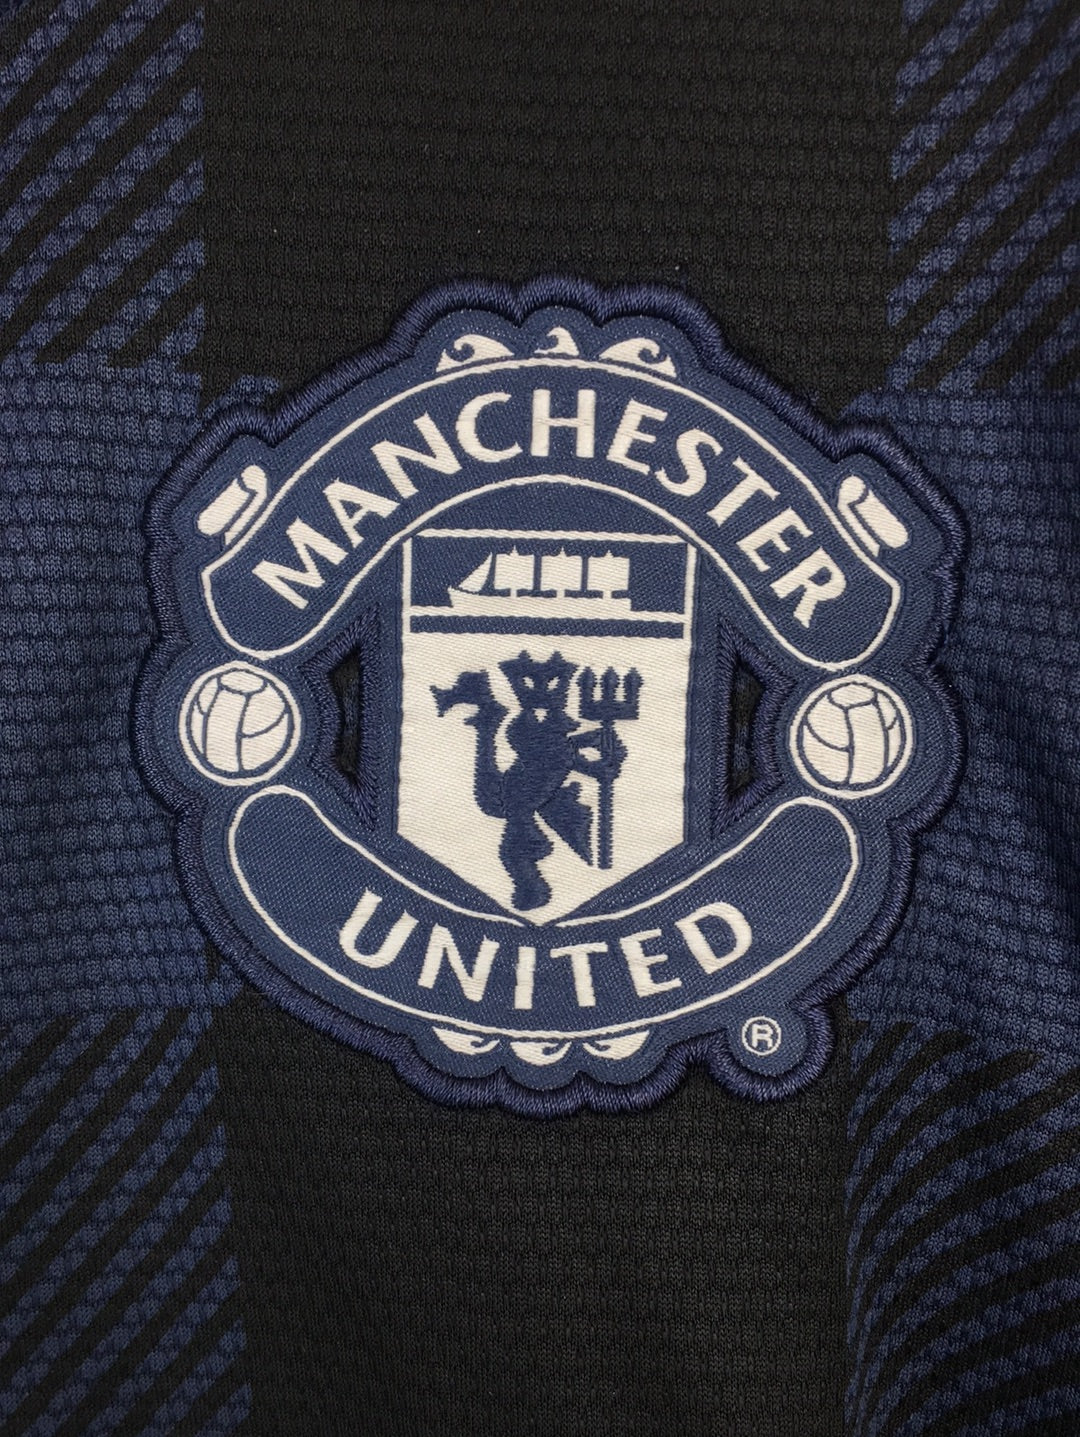 Nike Manchester United jersey (XL)